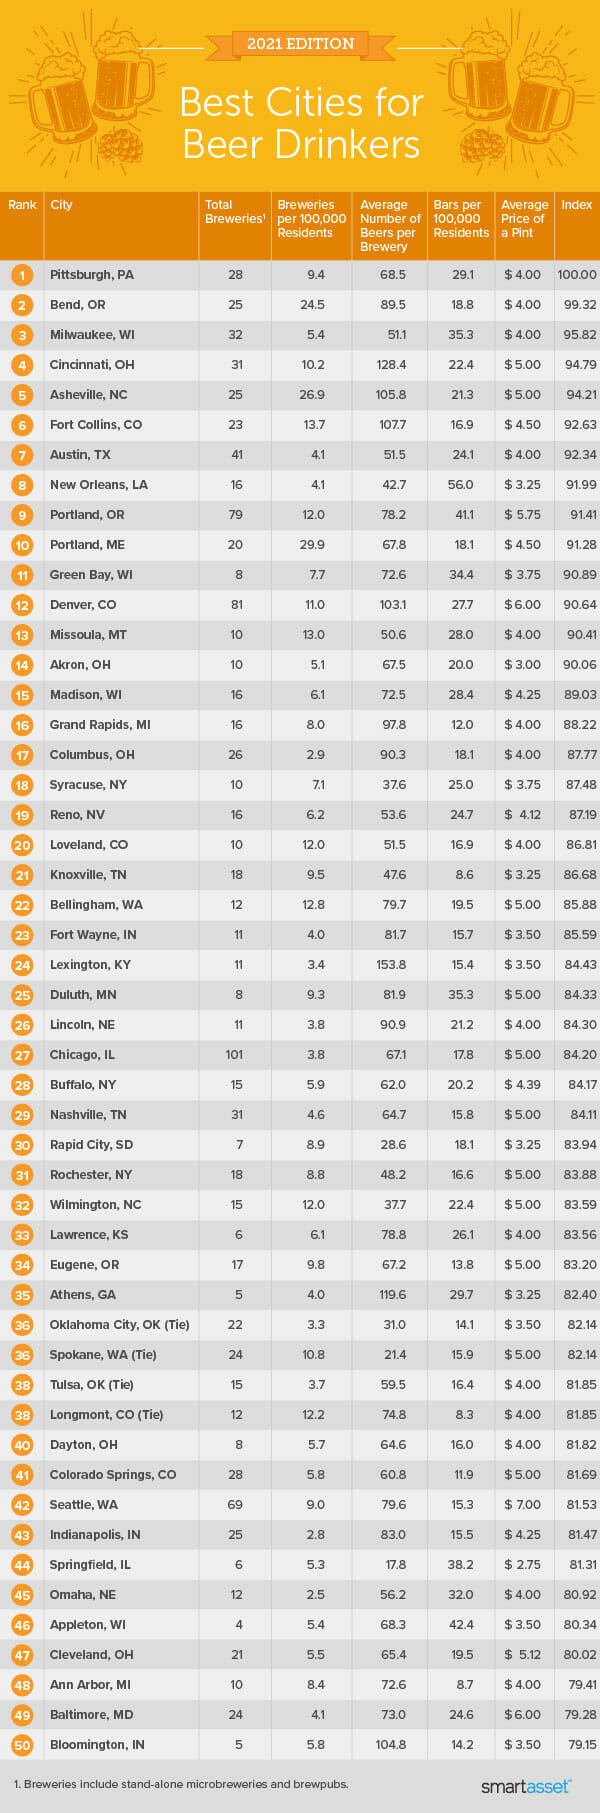 Image is a table by SmartAsset titled "Best Cities for Beer Drinkers."